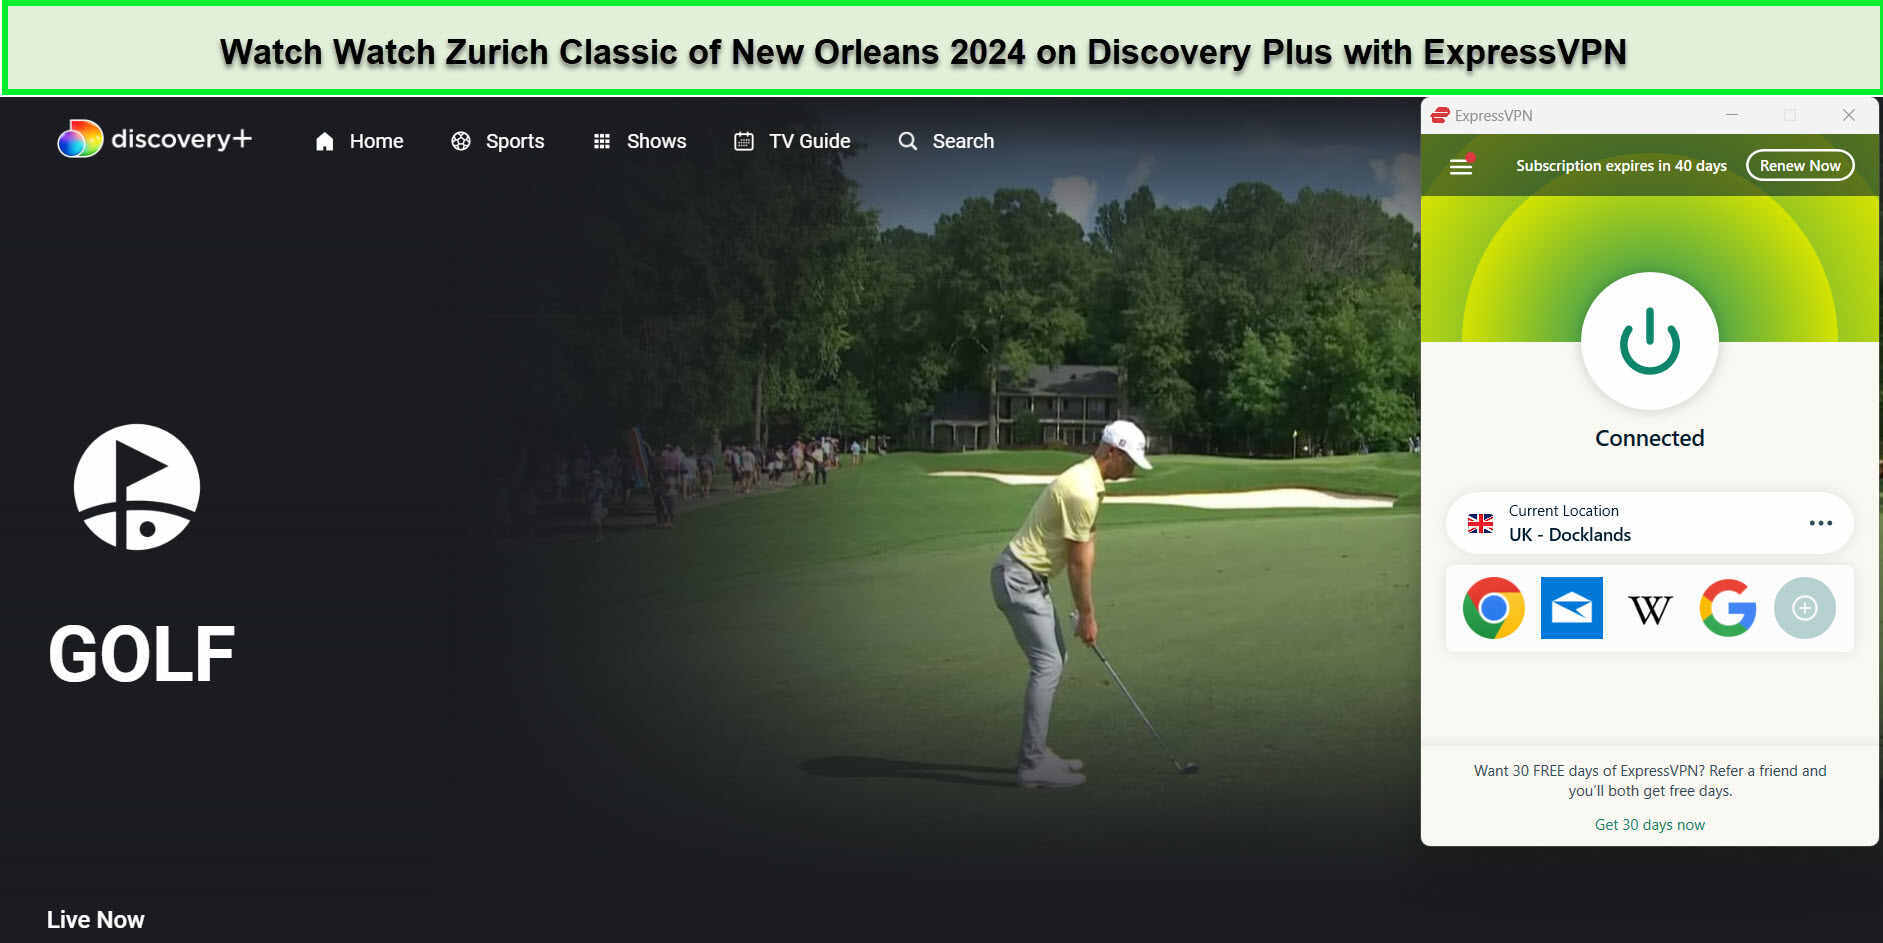 Watch-Zurich-Classic-of-New-Orleans-2024-outside-USA-On-Discovery-Plus-with-ExpressVPN